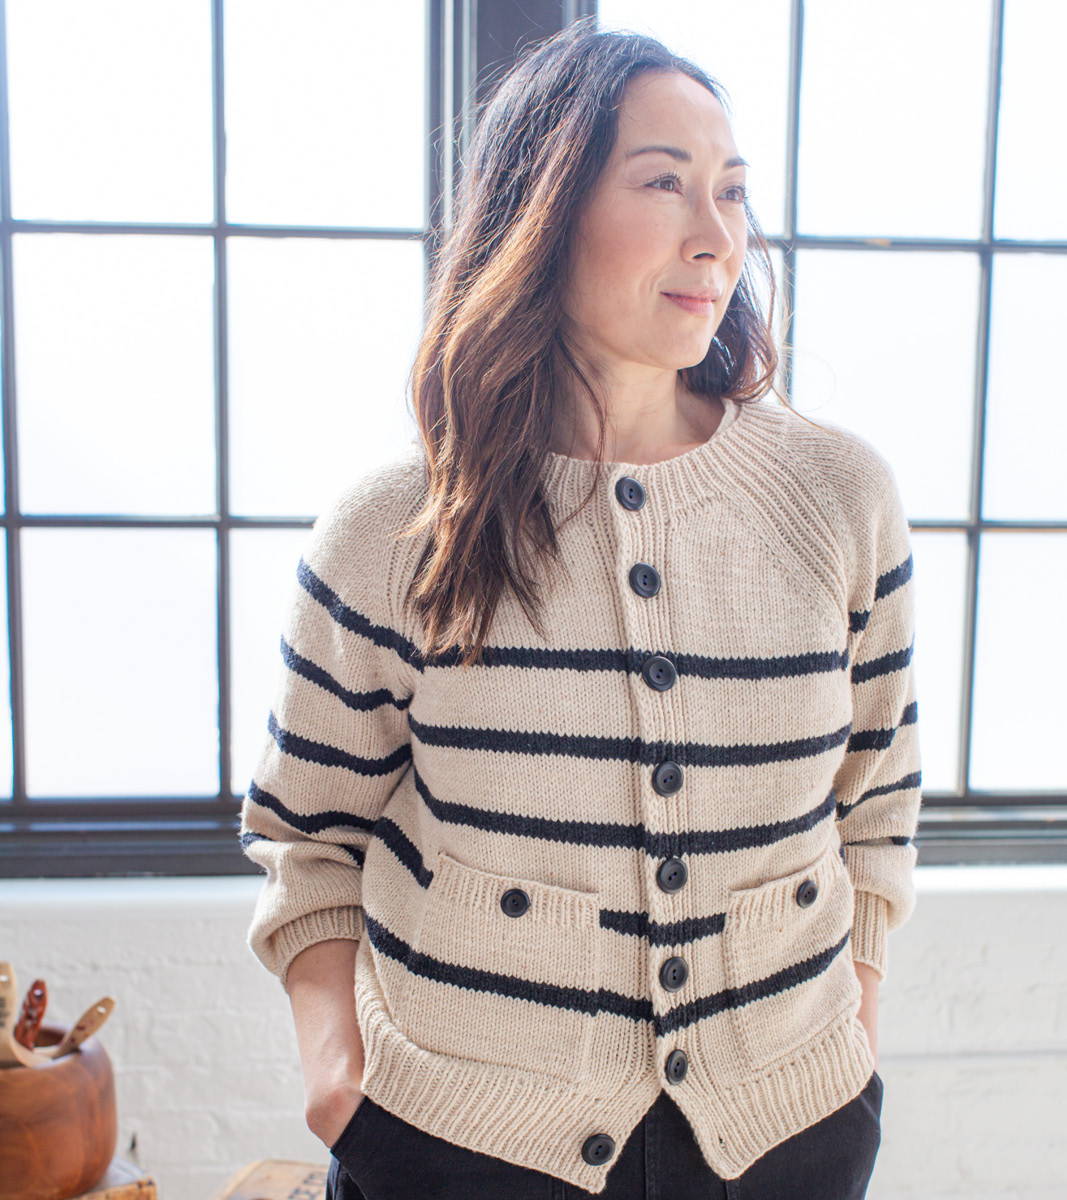 Laura modeling First Cardigan Sweater sample in Crepe & Carbon stripes